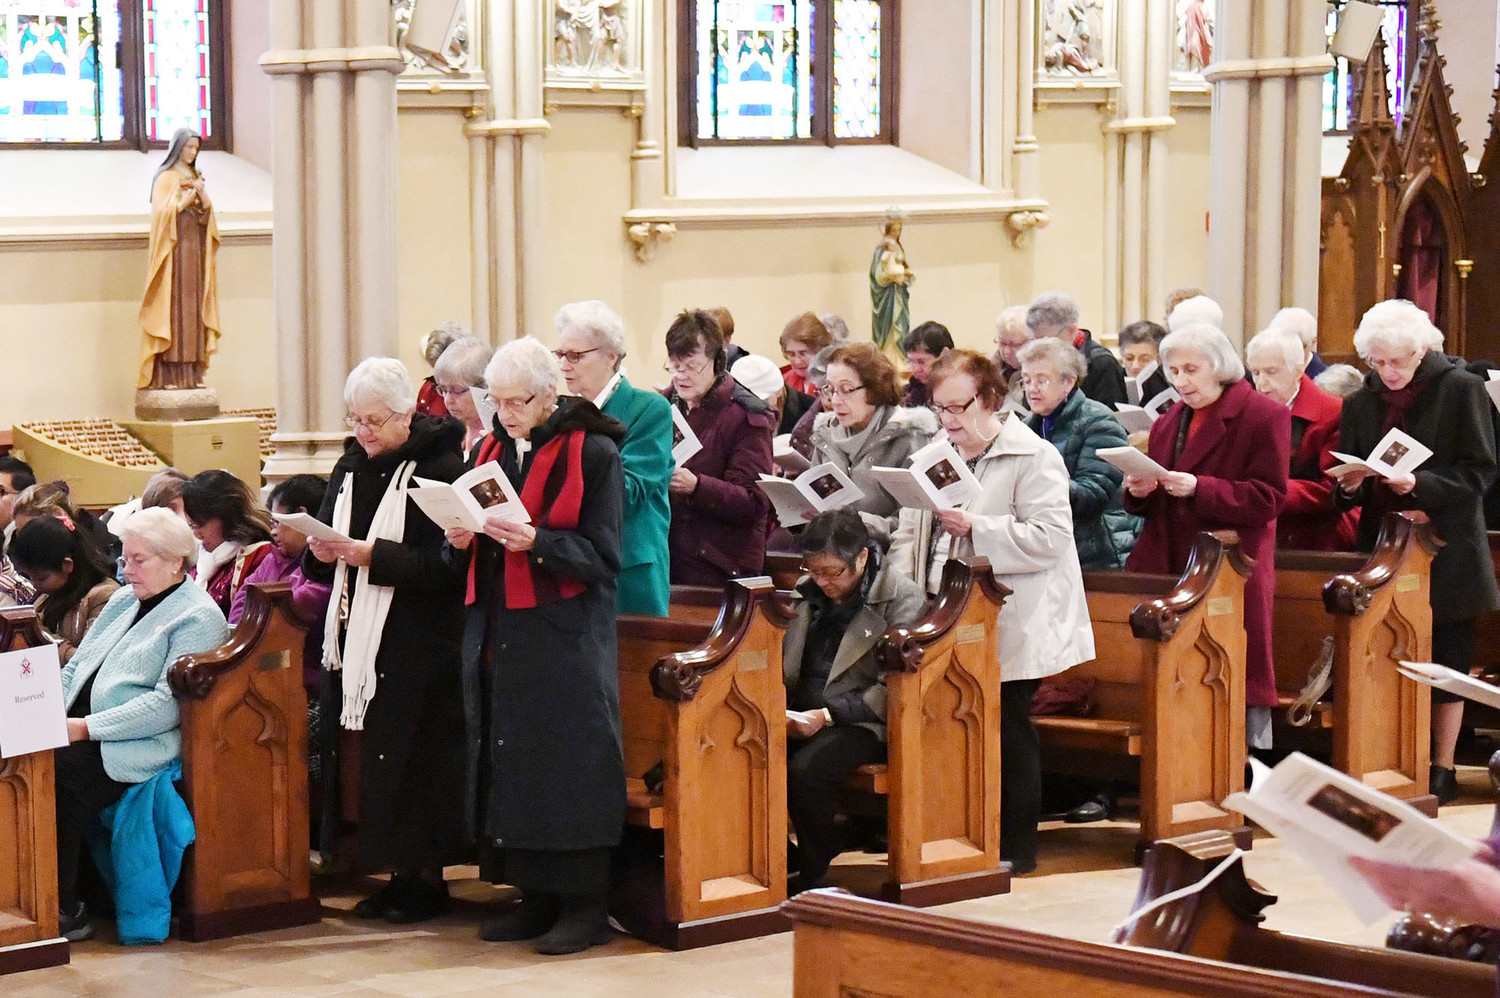 The Sisters of Charity celebrate the 200th anniversary of their arrival in New York at a Mass Dec. 9 at the Basilica of St. Patrick’s Old Cathedral. Top left, some sisters stand and renew their vows.